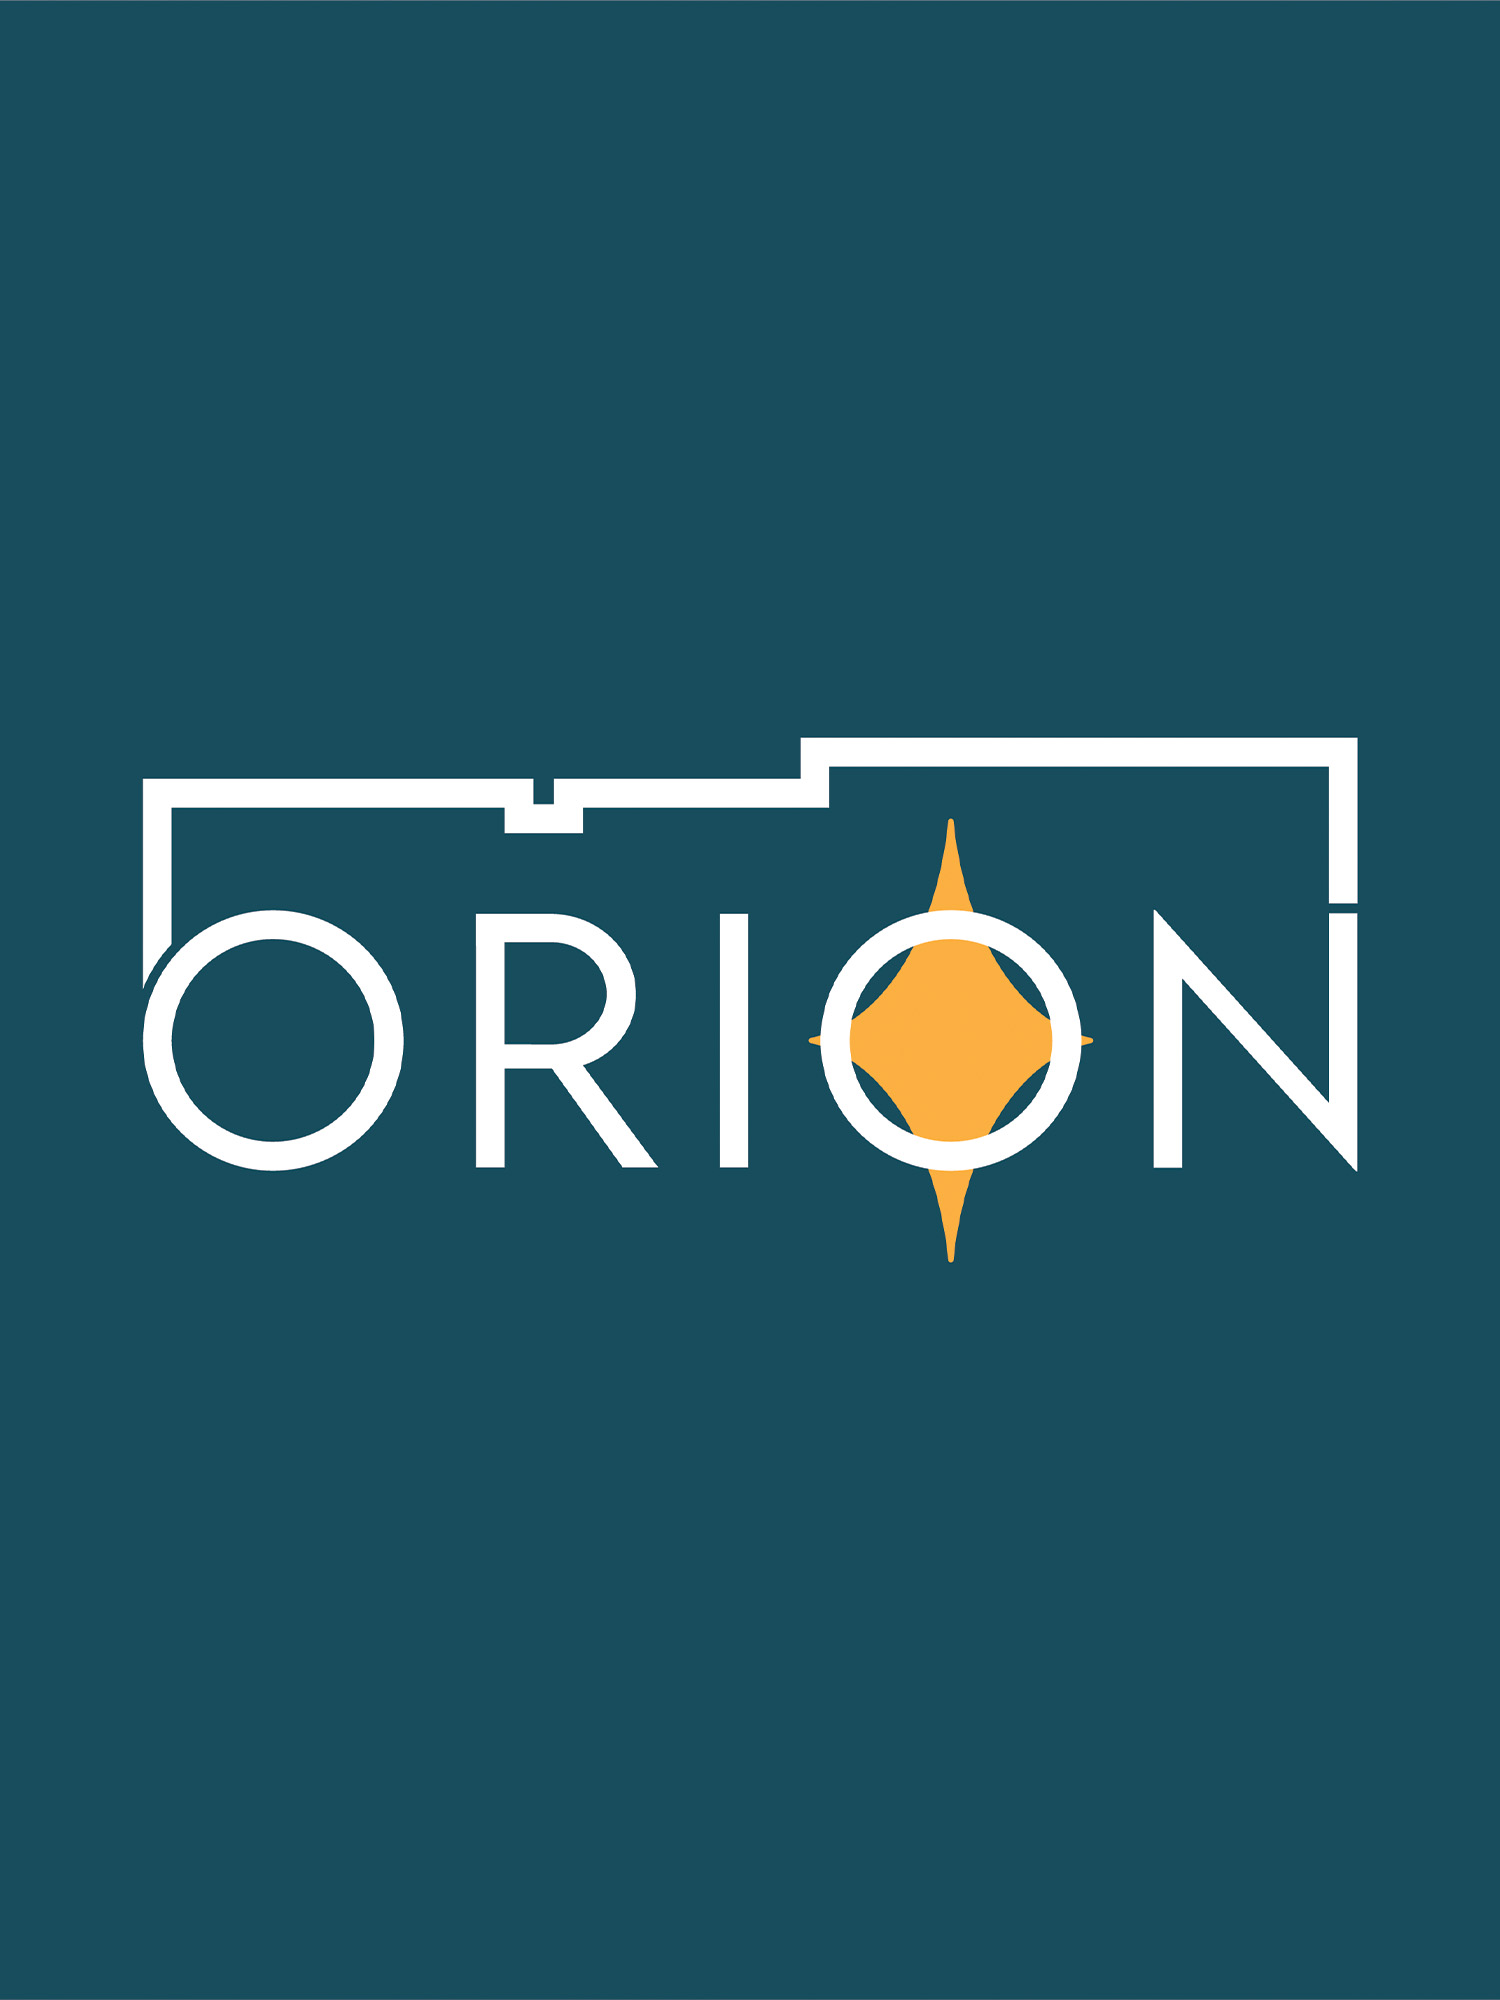 Orion Airbnb